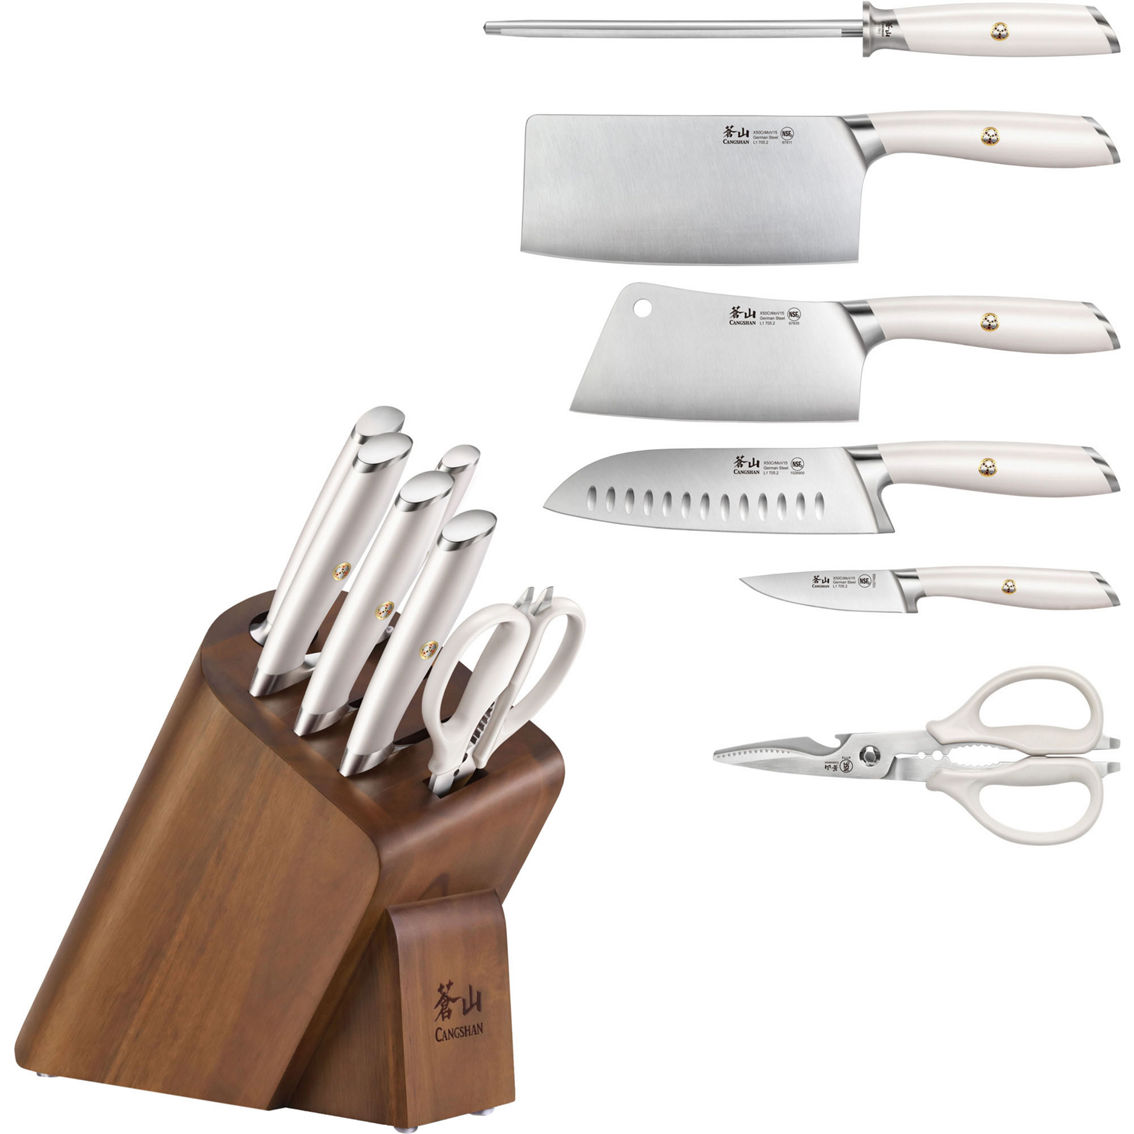 Cangshan Cutlery L1 Series White Cleaver Knife Block Set 7 pc. - Image 3 of 6